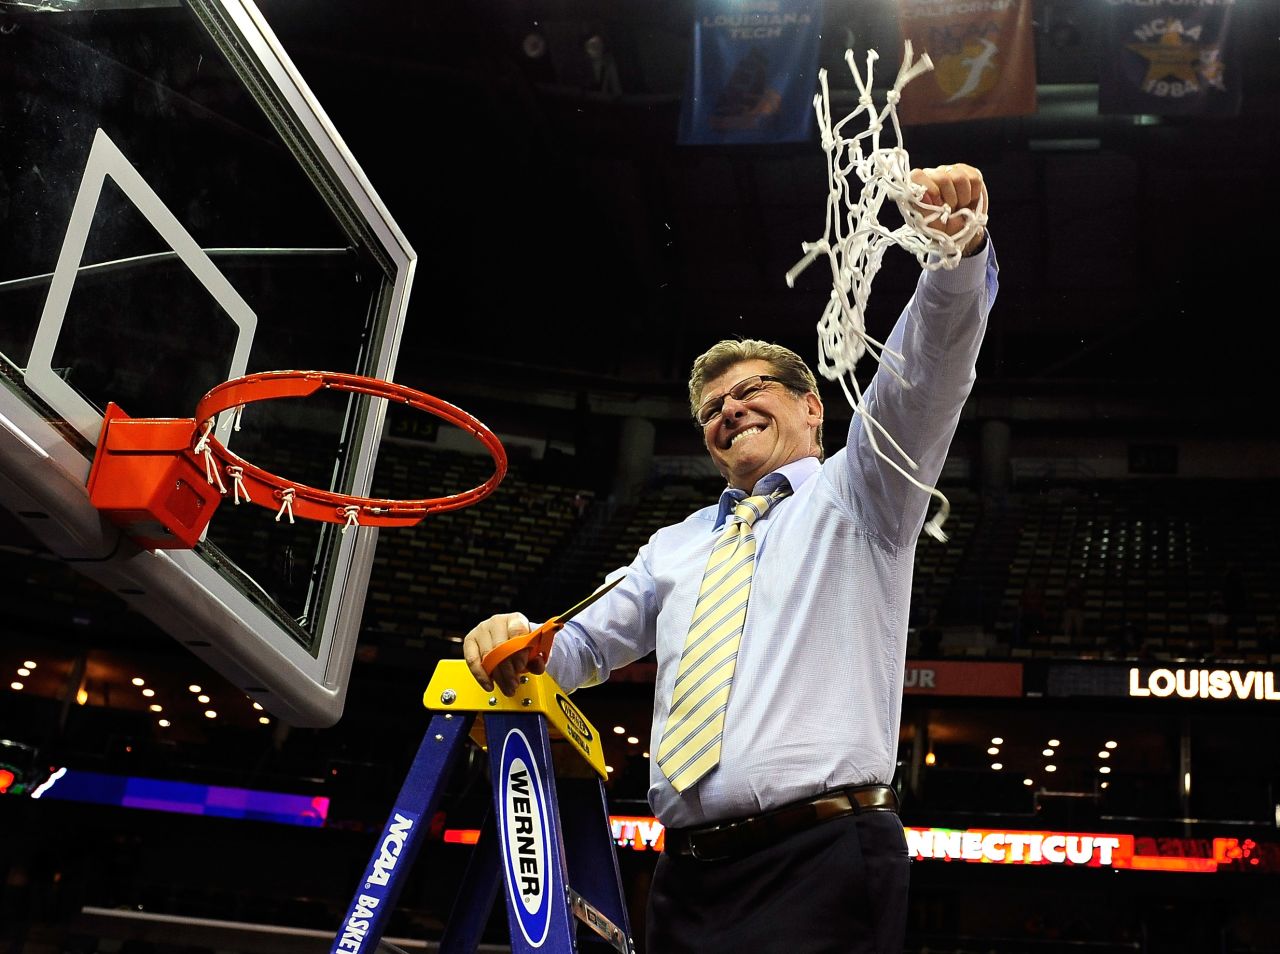 UCONN head coach Geno Auriemma cuts down the net after defeating the Louisville Cardinals on April 9.